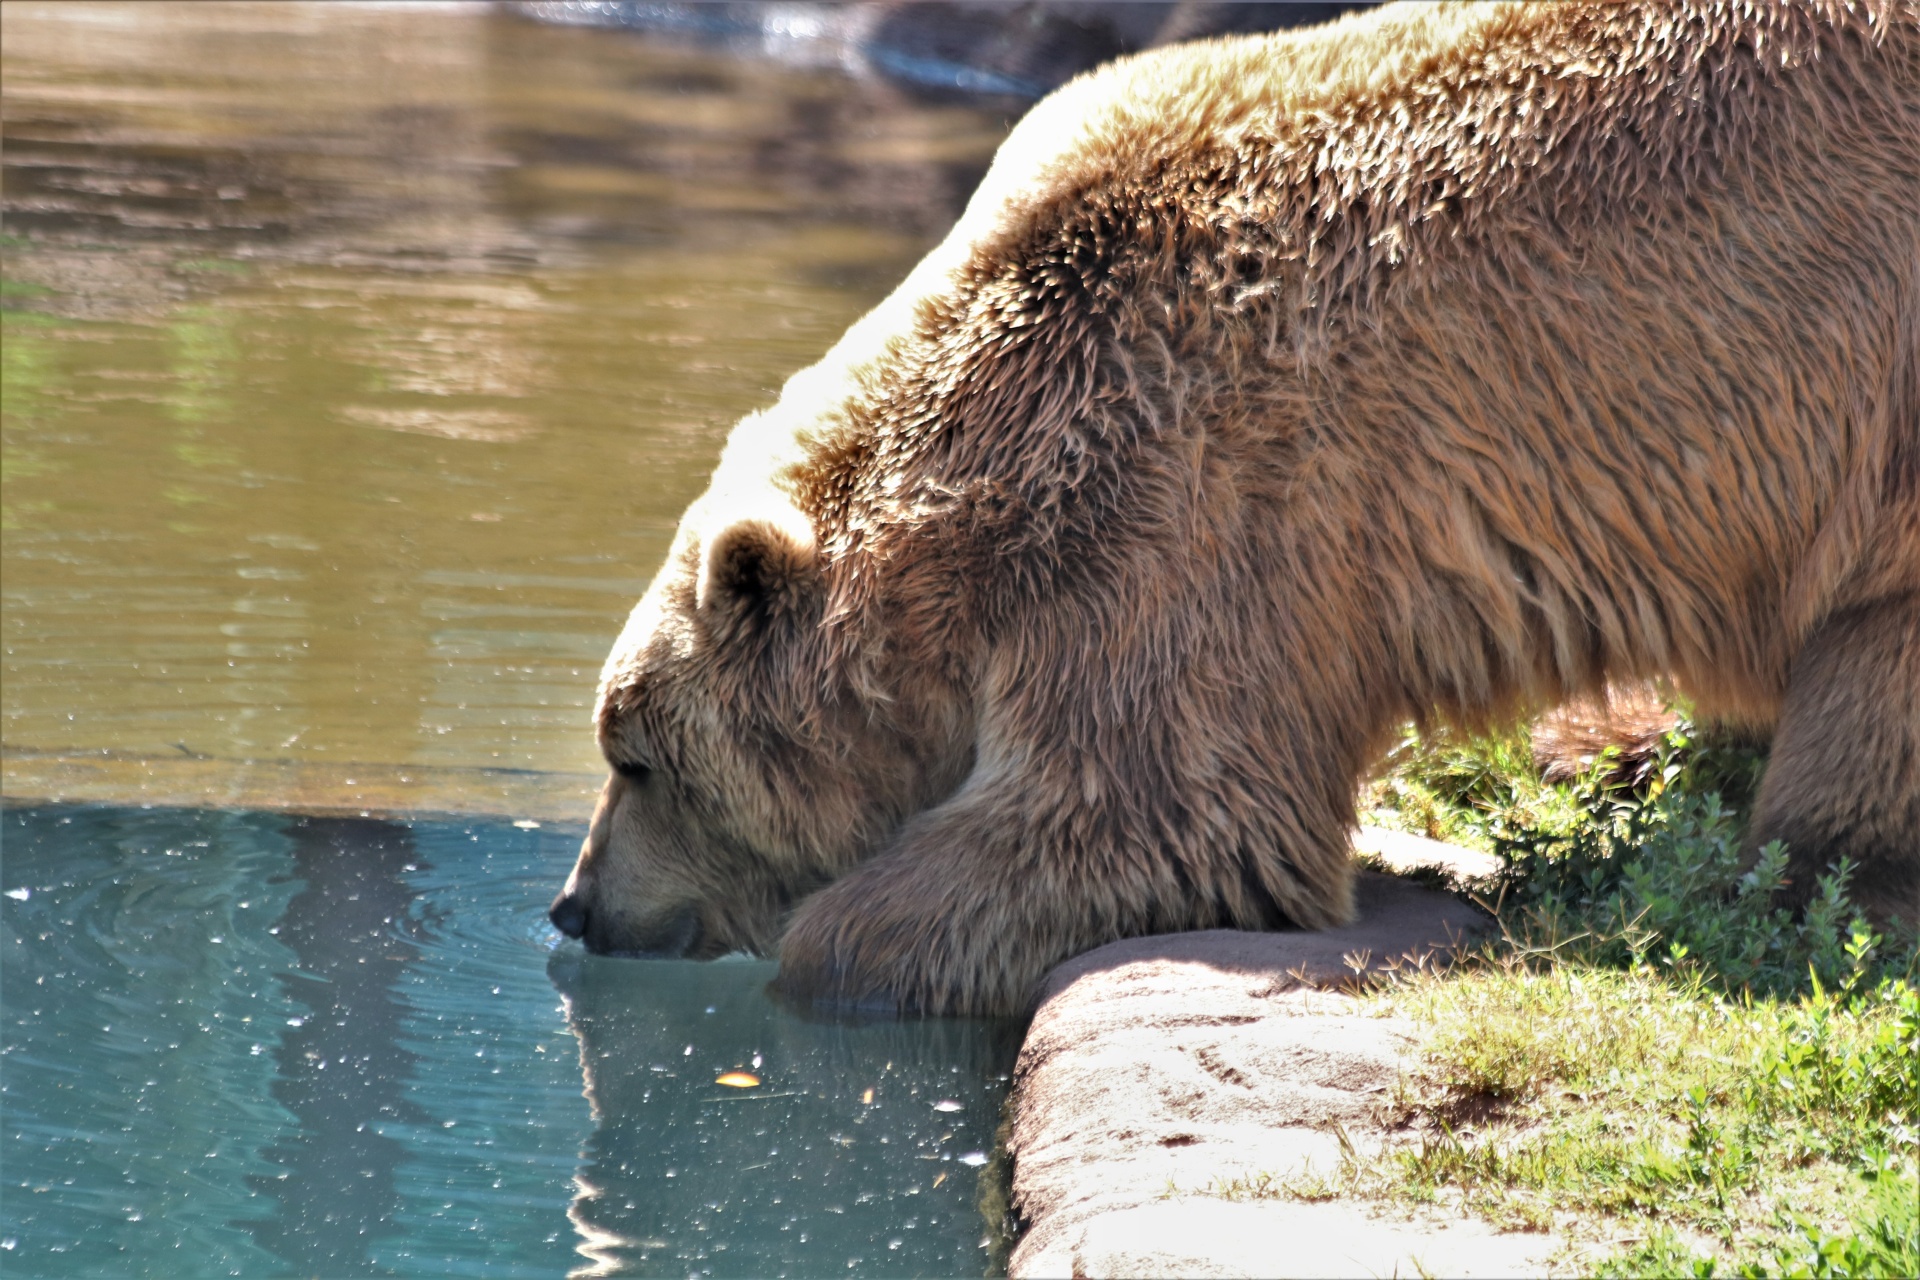 Close-up of a light brown grizzly bear getting a drink or water at the edge of a pond.